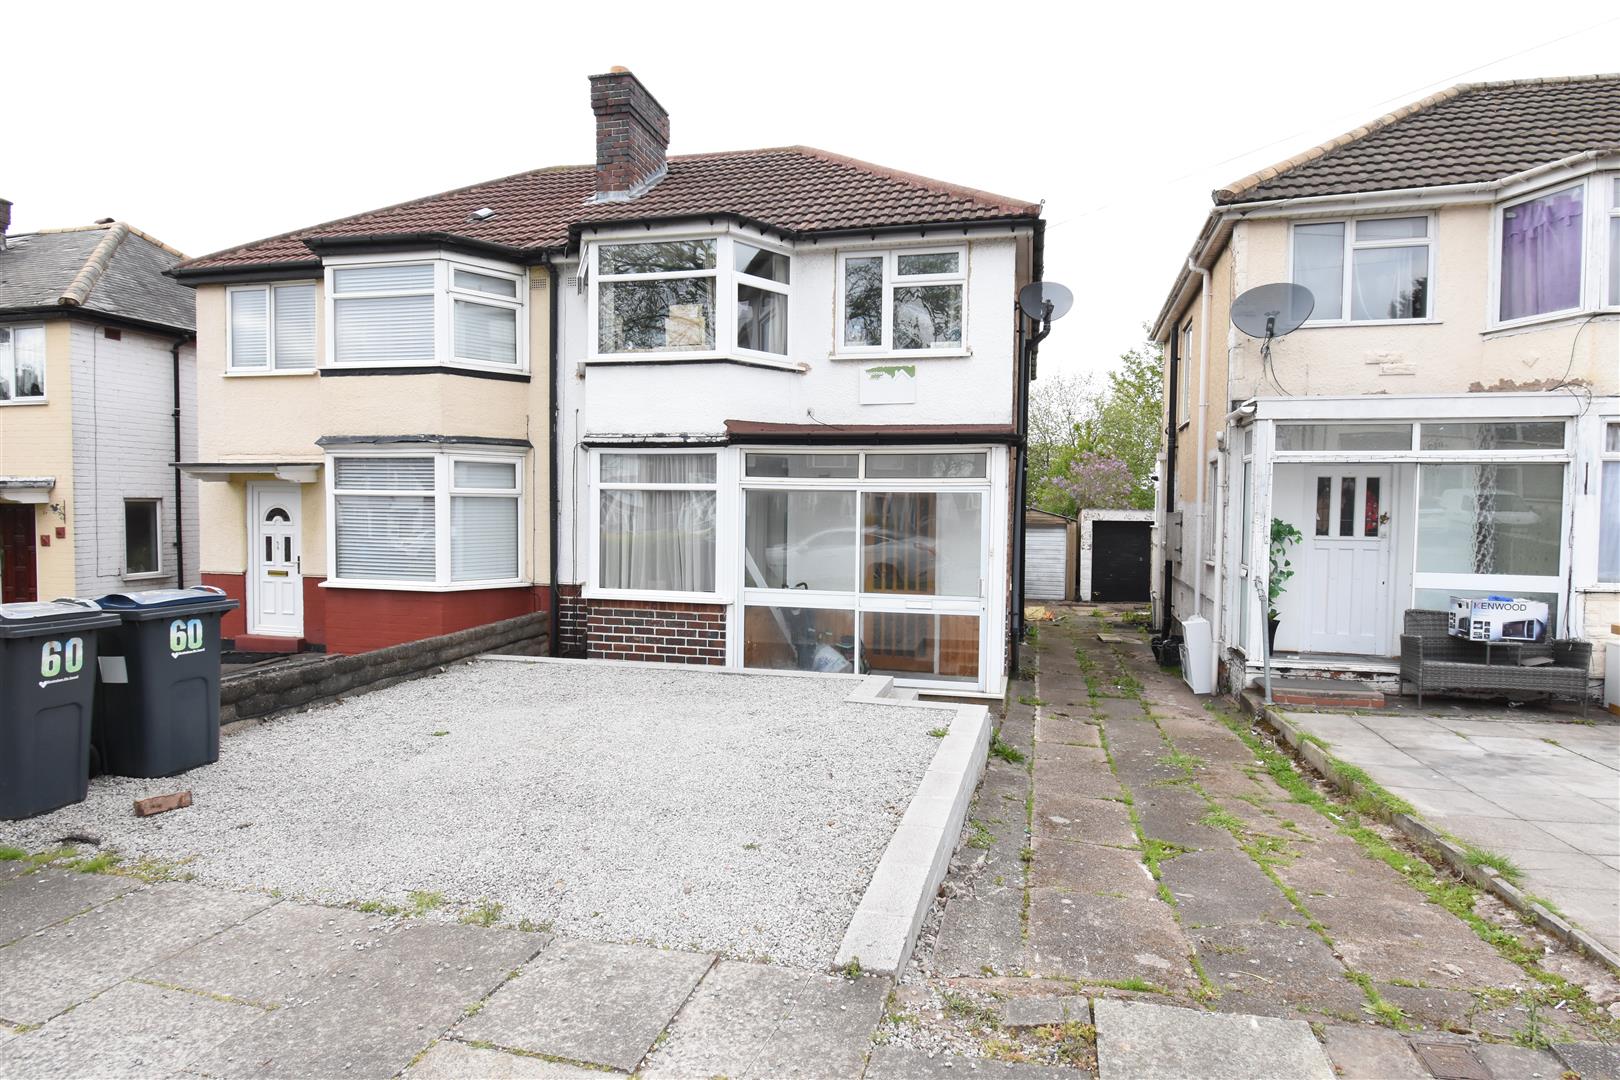 4 bed house for sale in Fairholme Road, Hodge Hill, Birmingham - Property Image 1